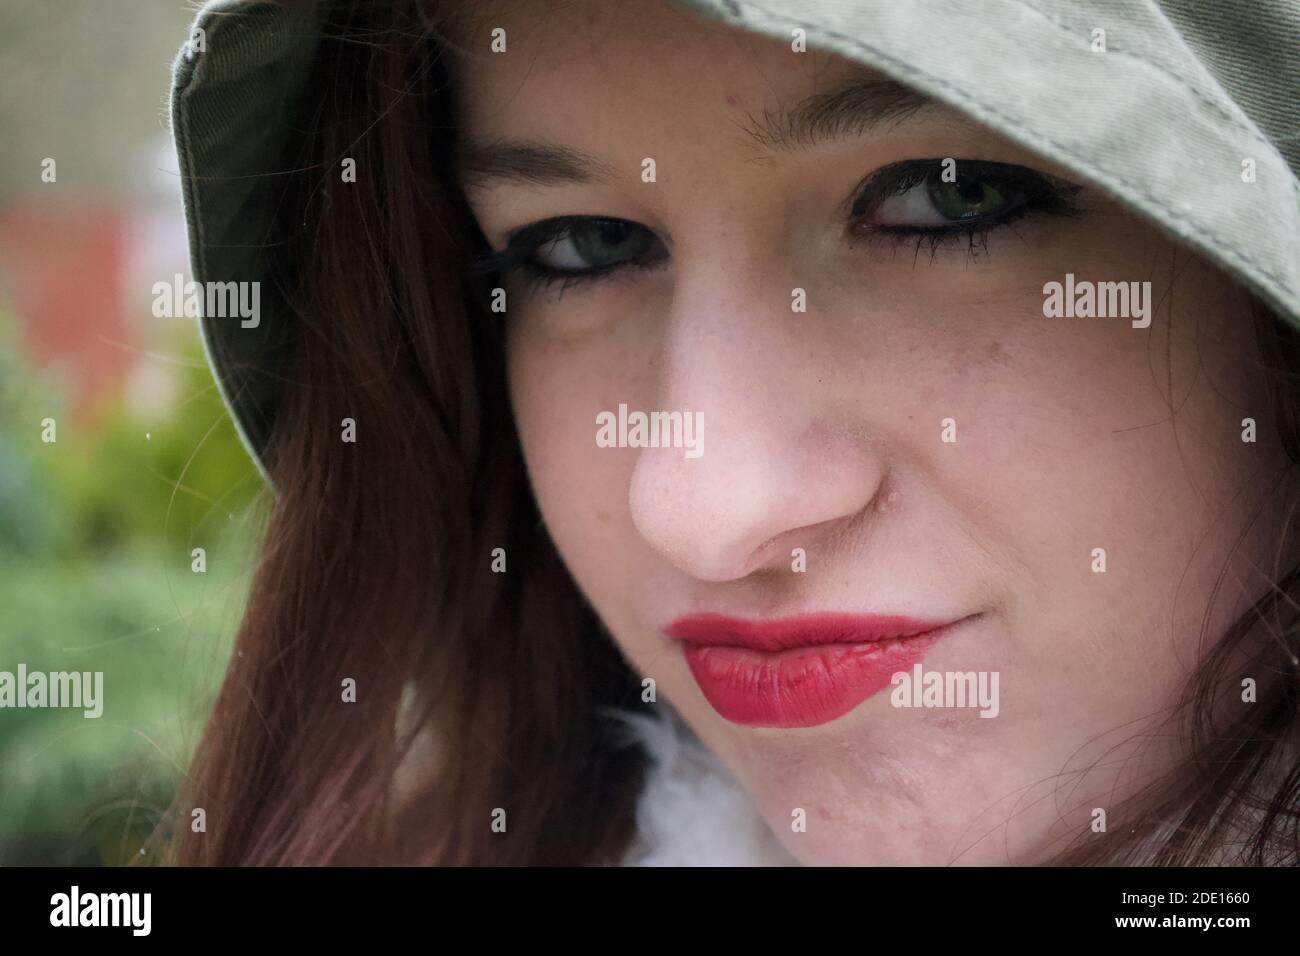 Pouting lips; the face of a lady wearing make up, with the hood of her raincoat pulled over her head to keep her dry from the weather Stock Photo